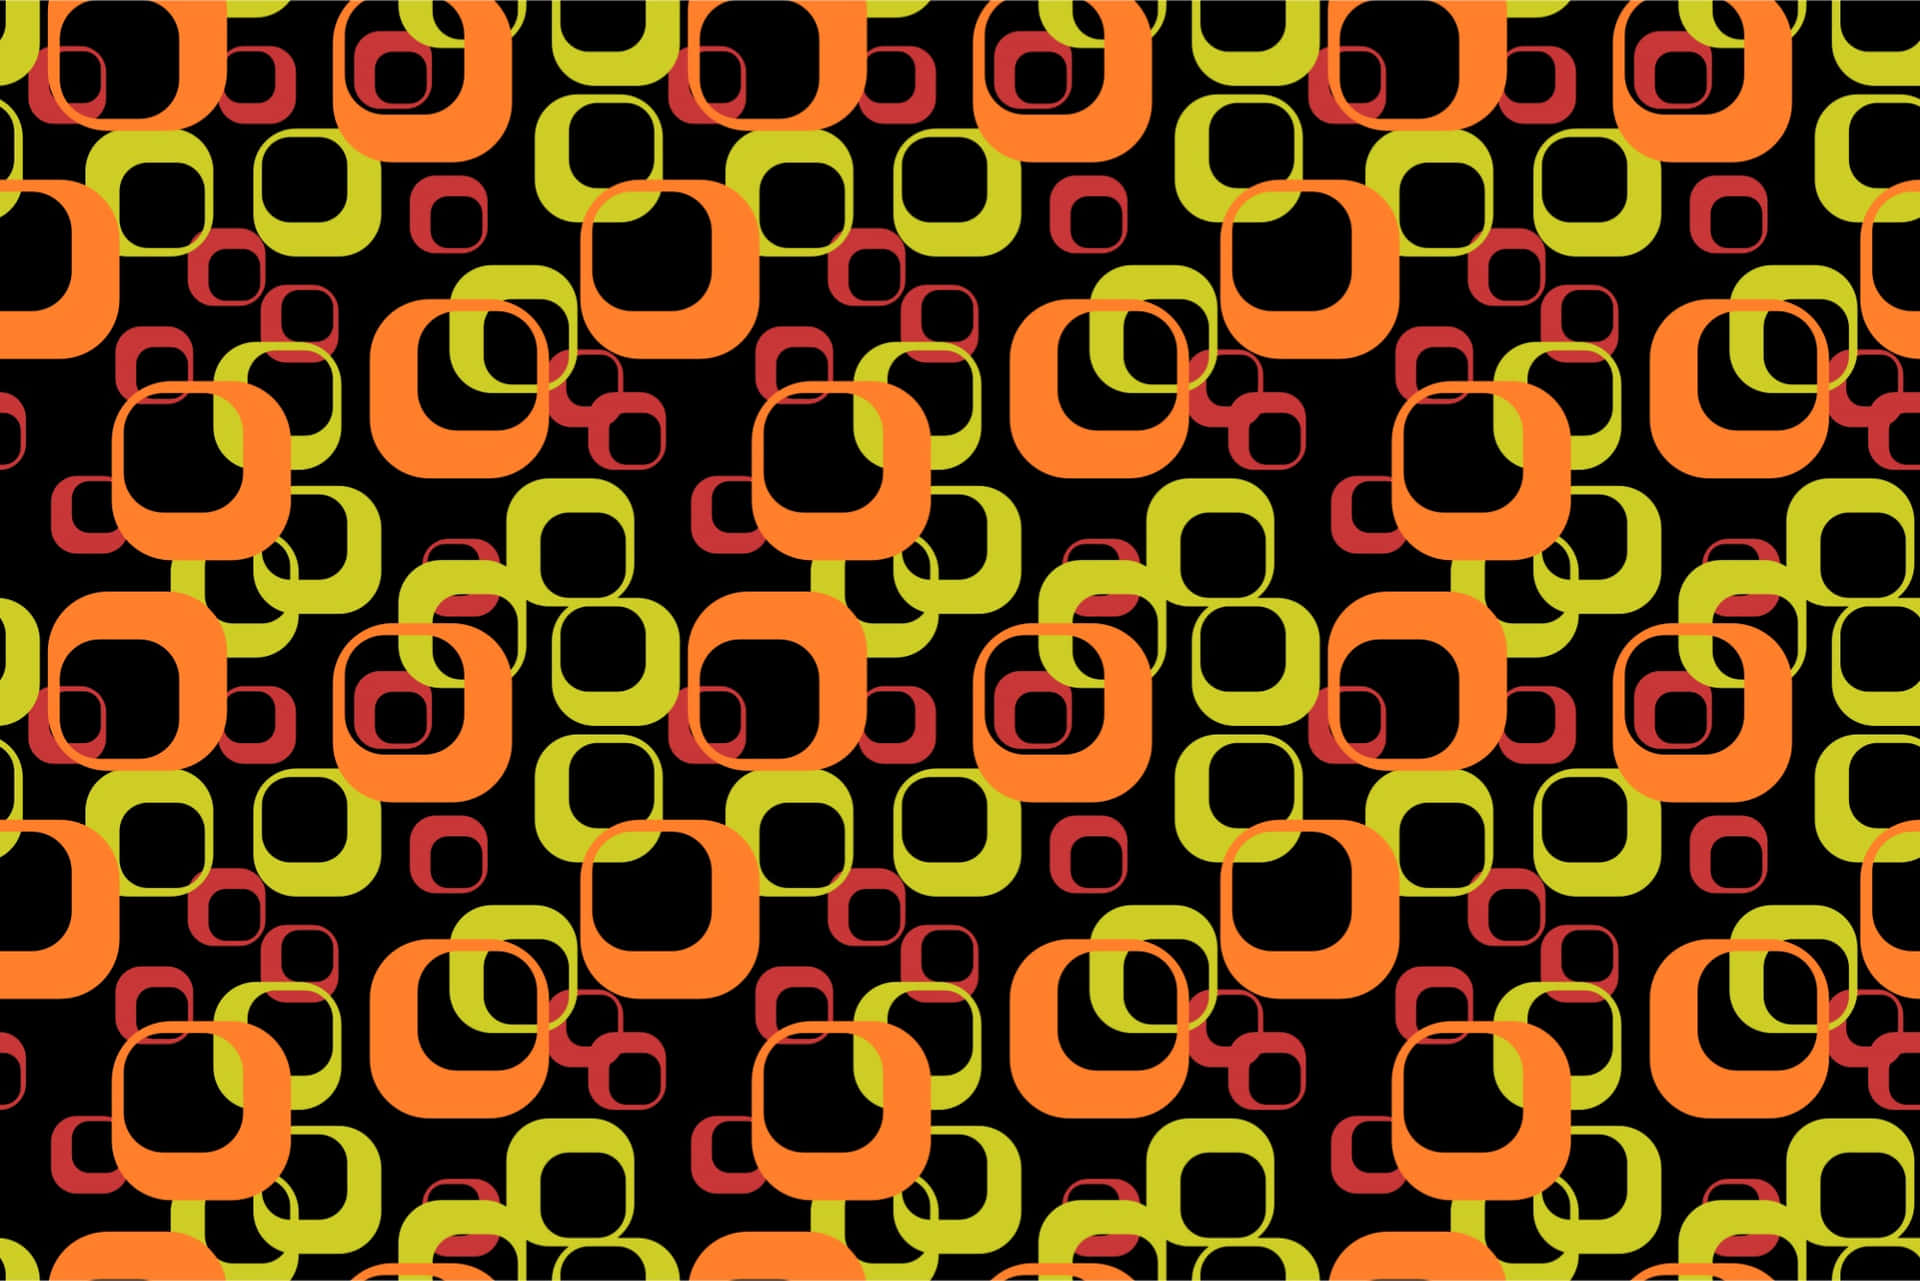 A Colorful Pattern With Orange And Yellow Circles